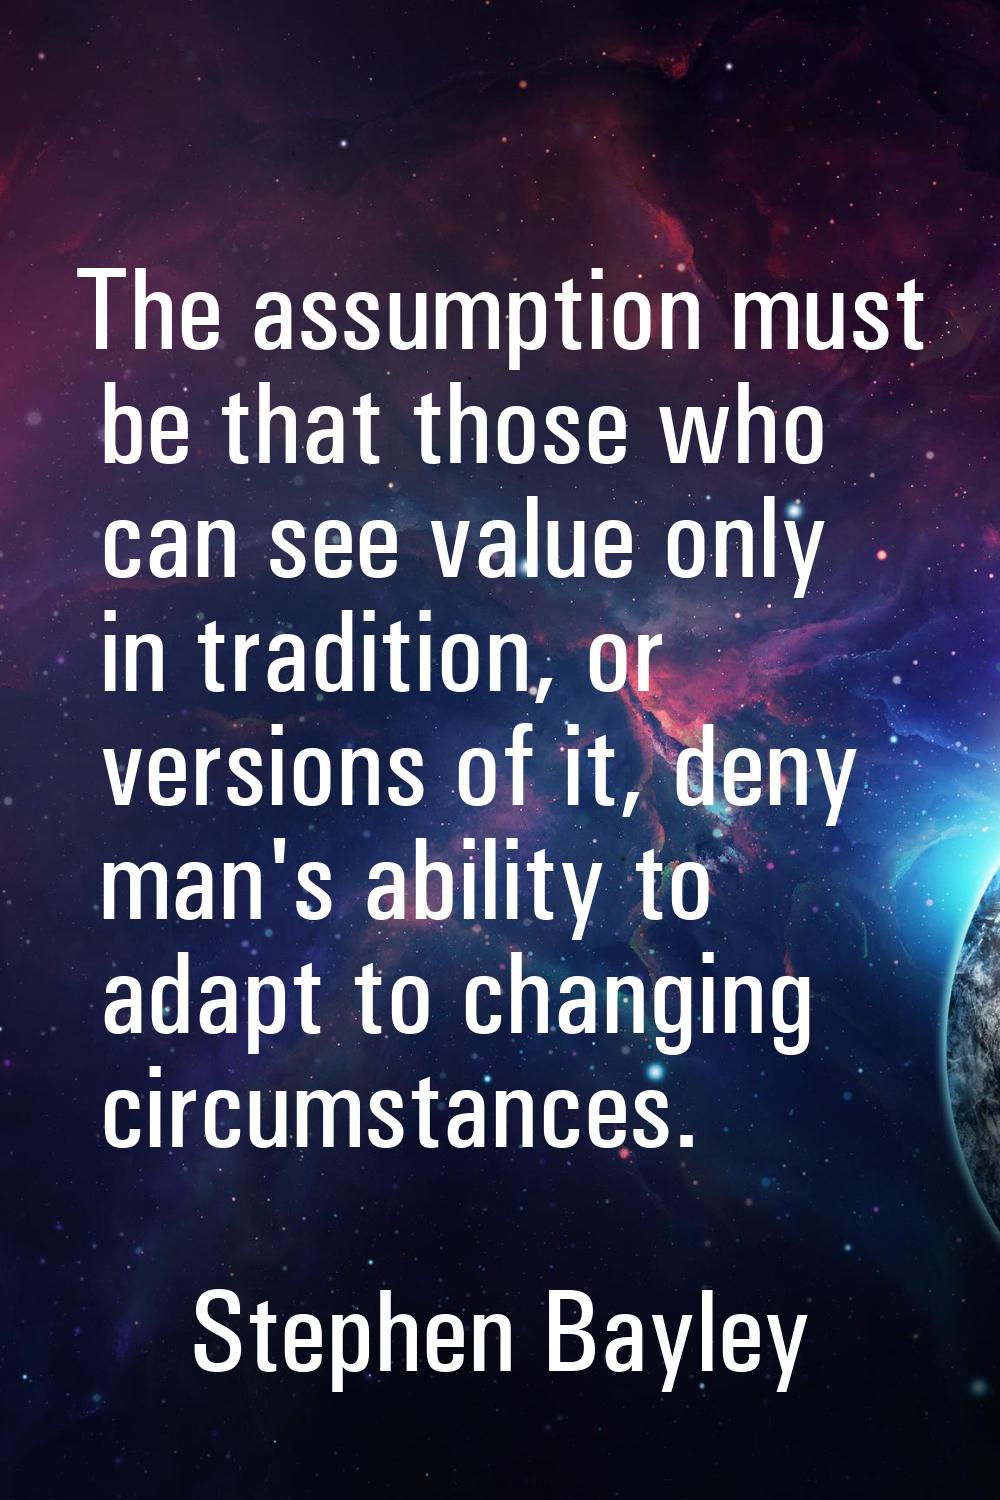 The assumption must be that those who can see value only in tradition, or versions of it, deny man'